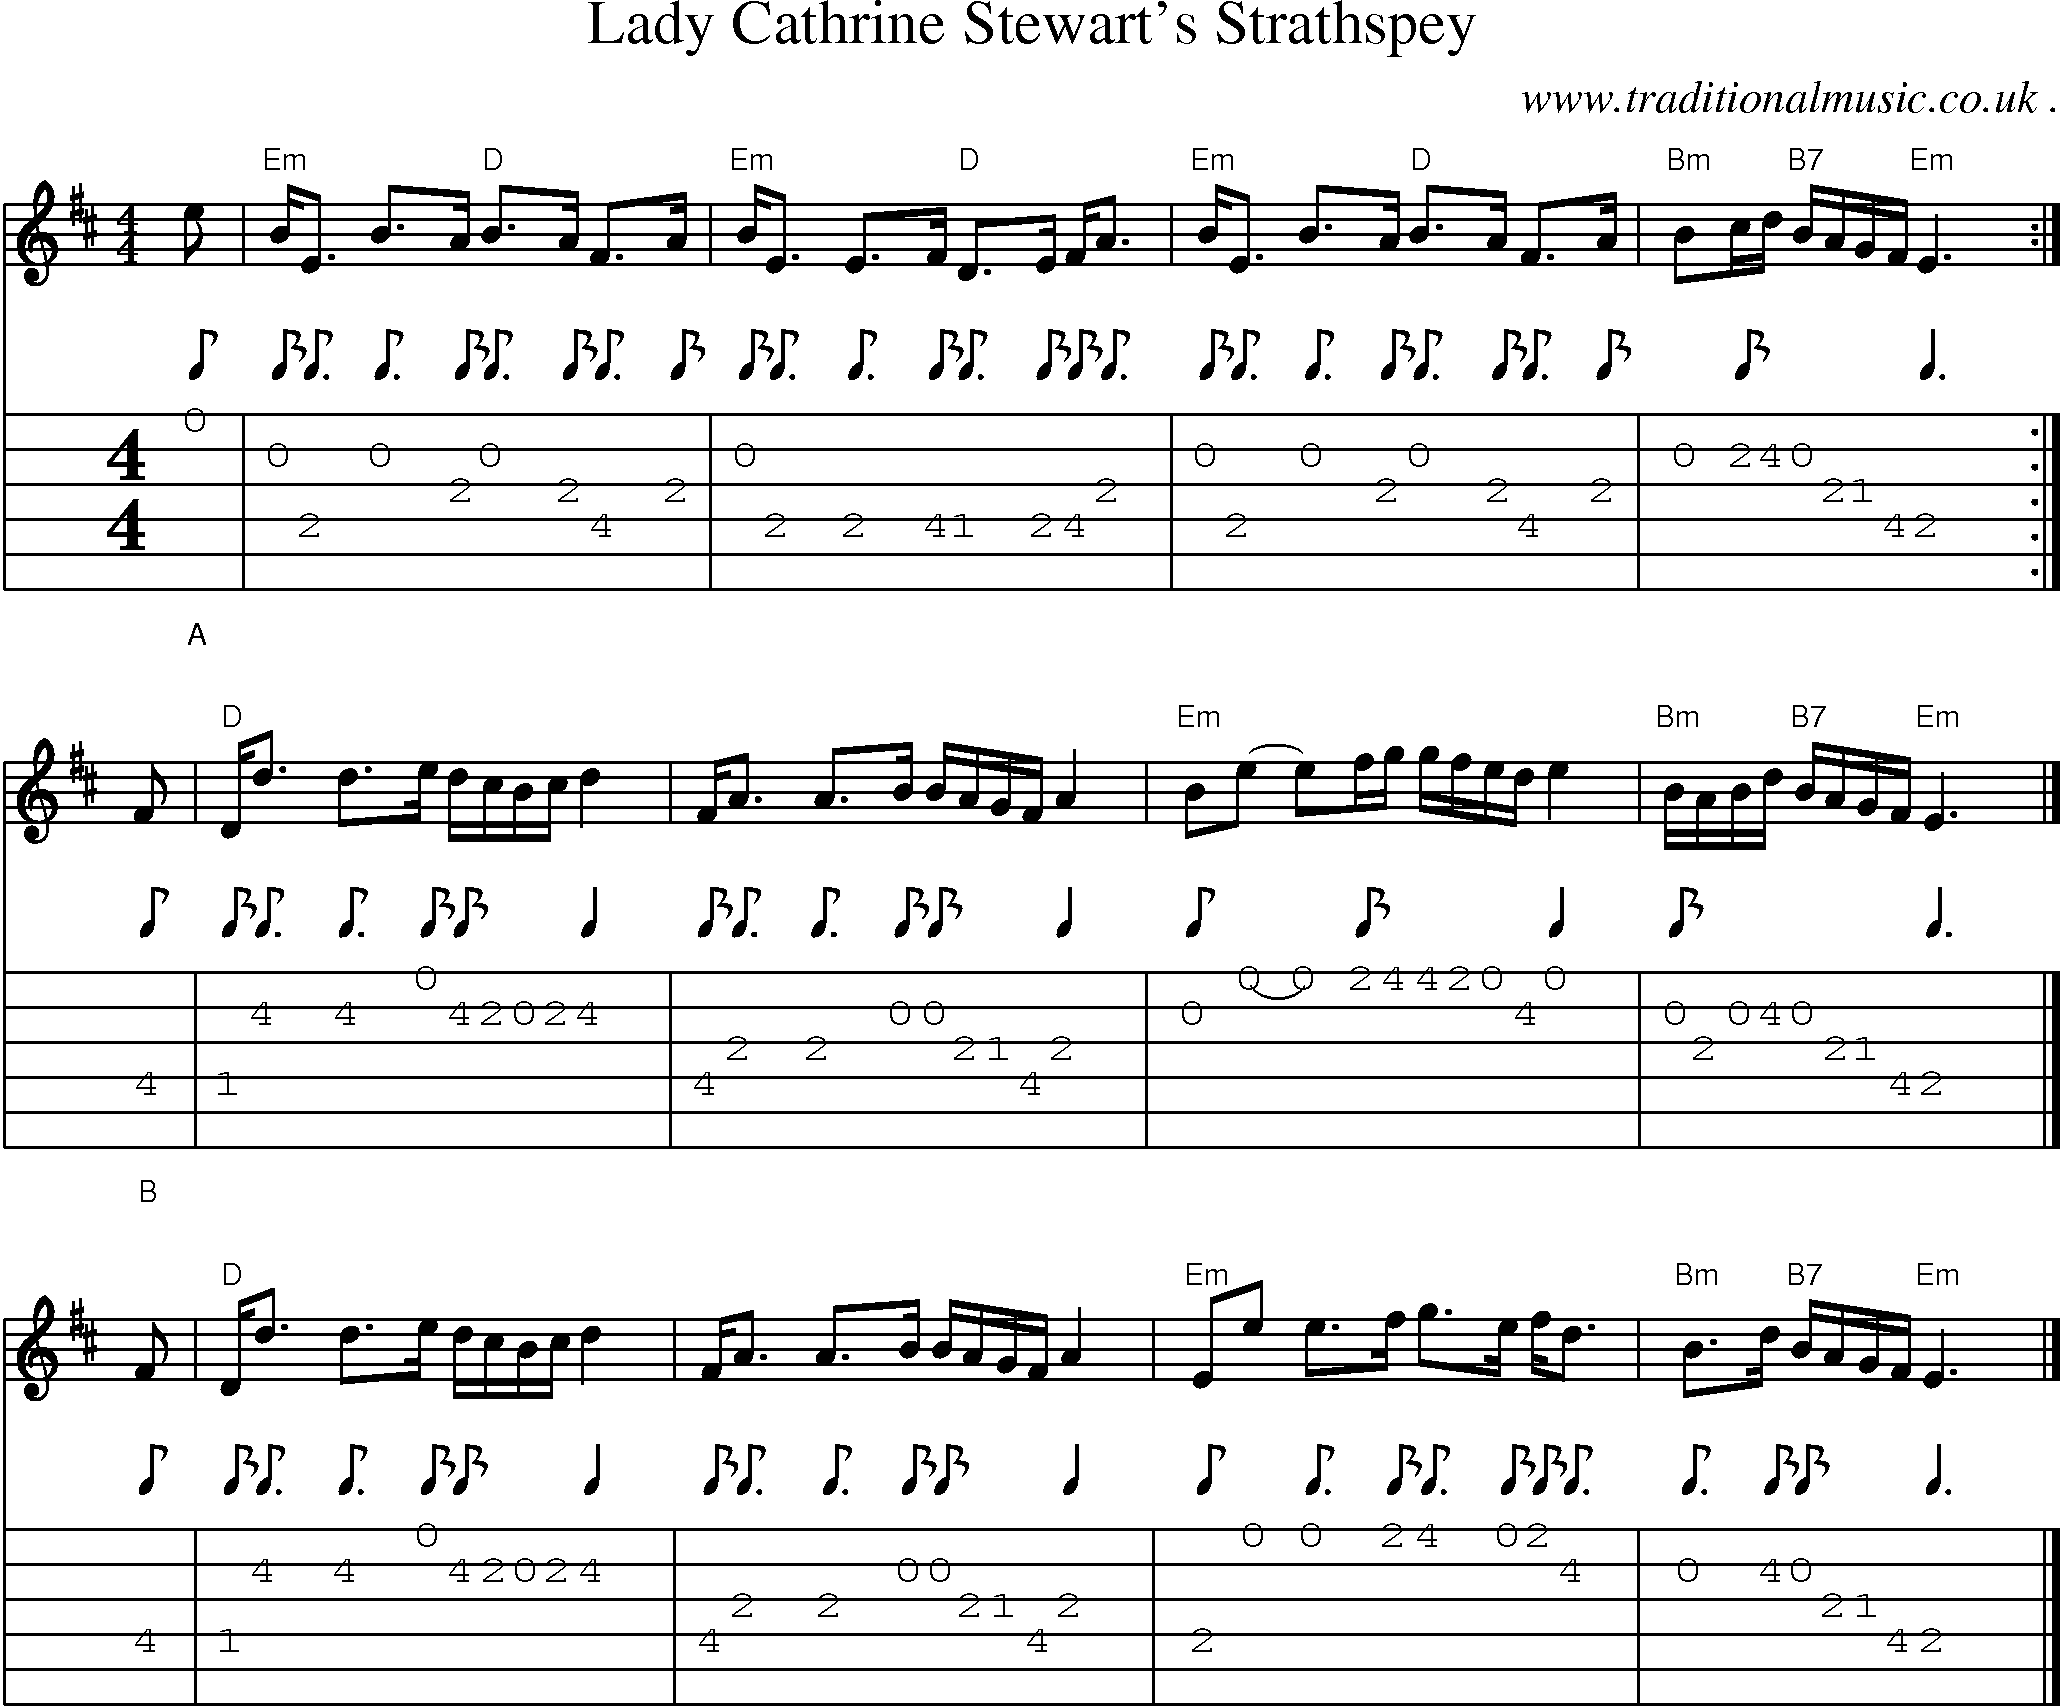 Sheet-music  score, Chords and Guitar Tabs for Lady Cathrine Stewarts Strathspey